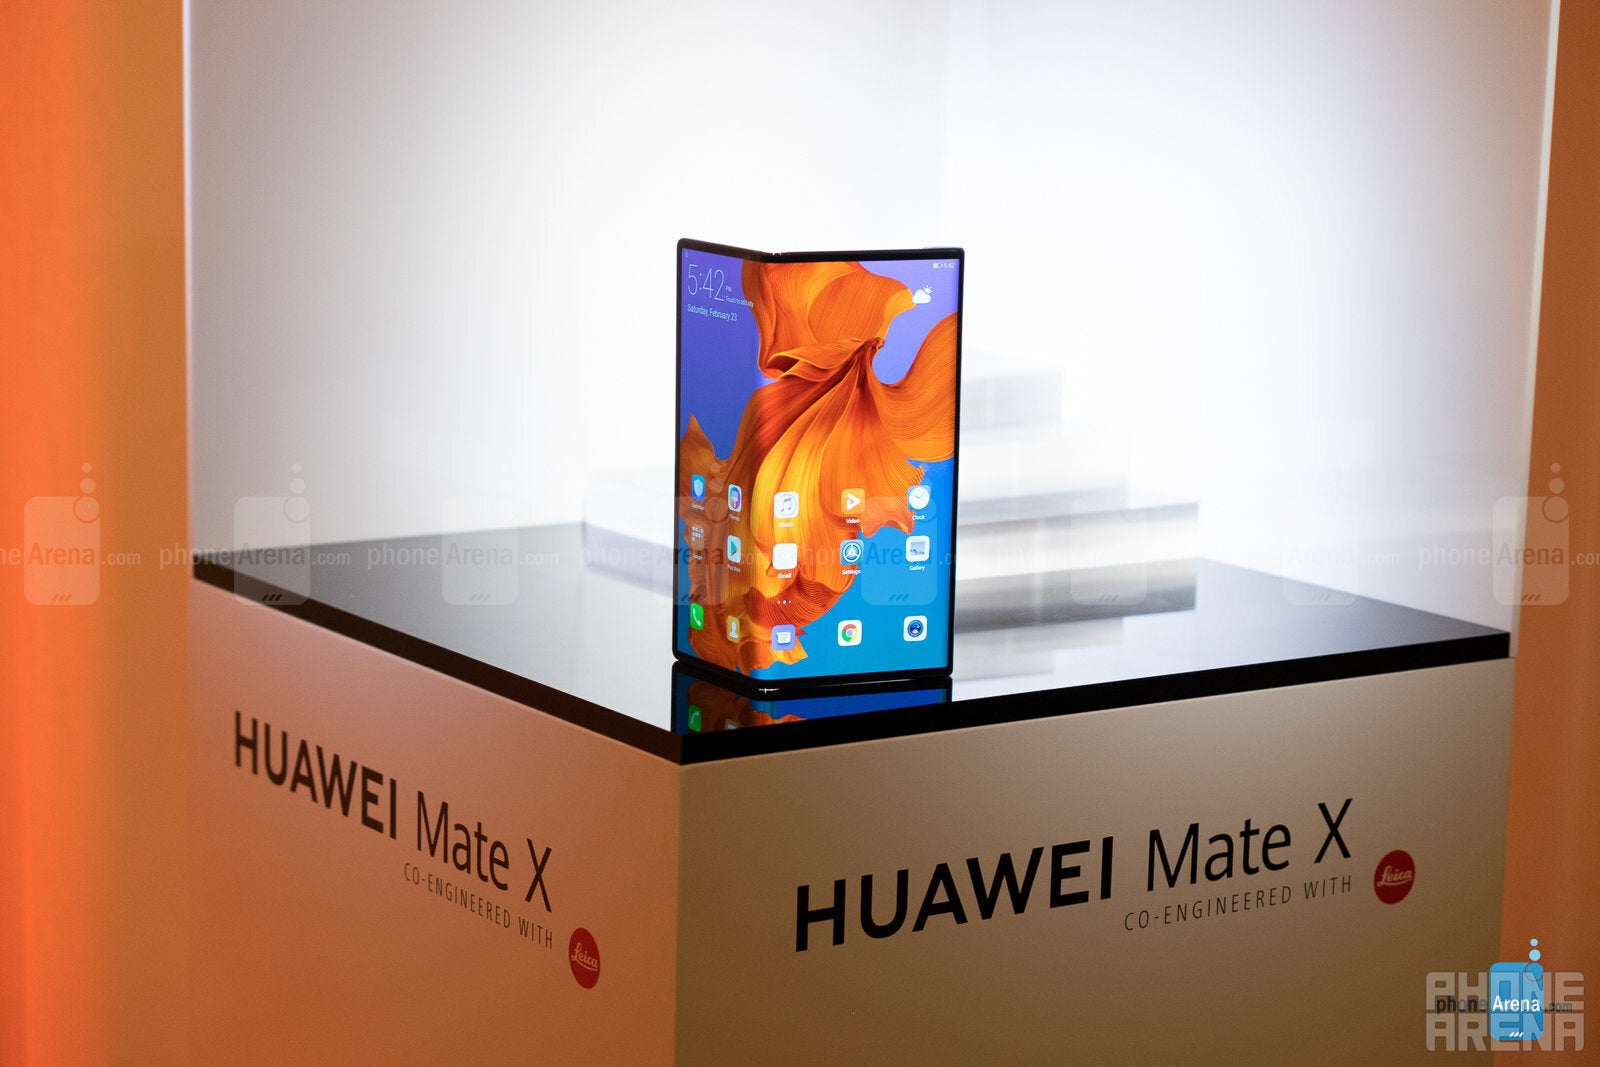 The Huawei Mate X is no longer expected to beat the Galaxy Fold to market